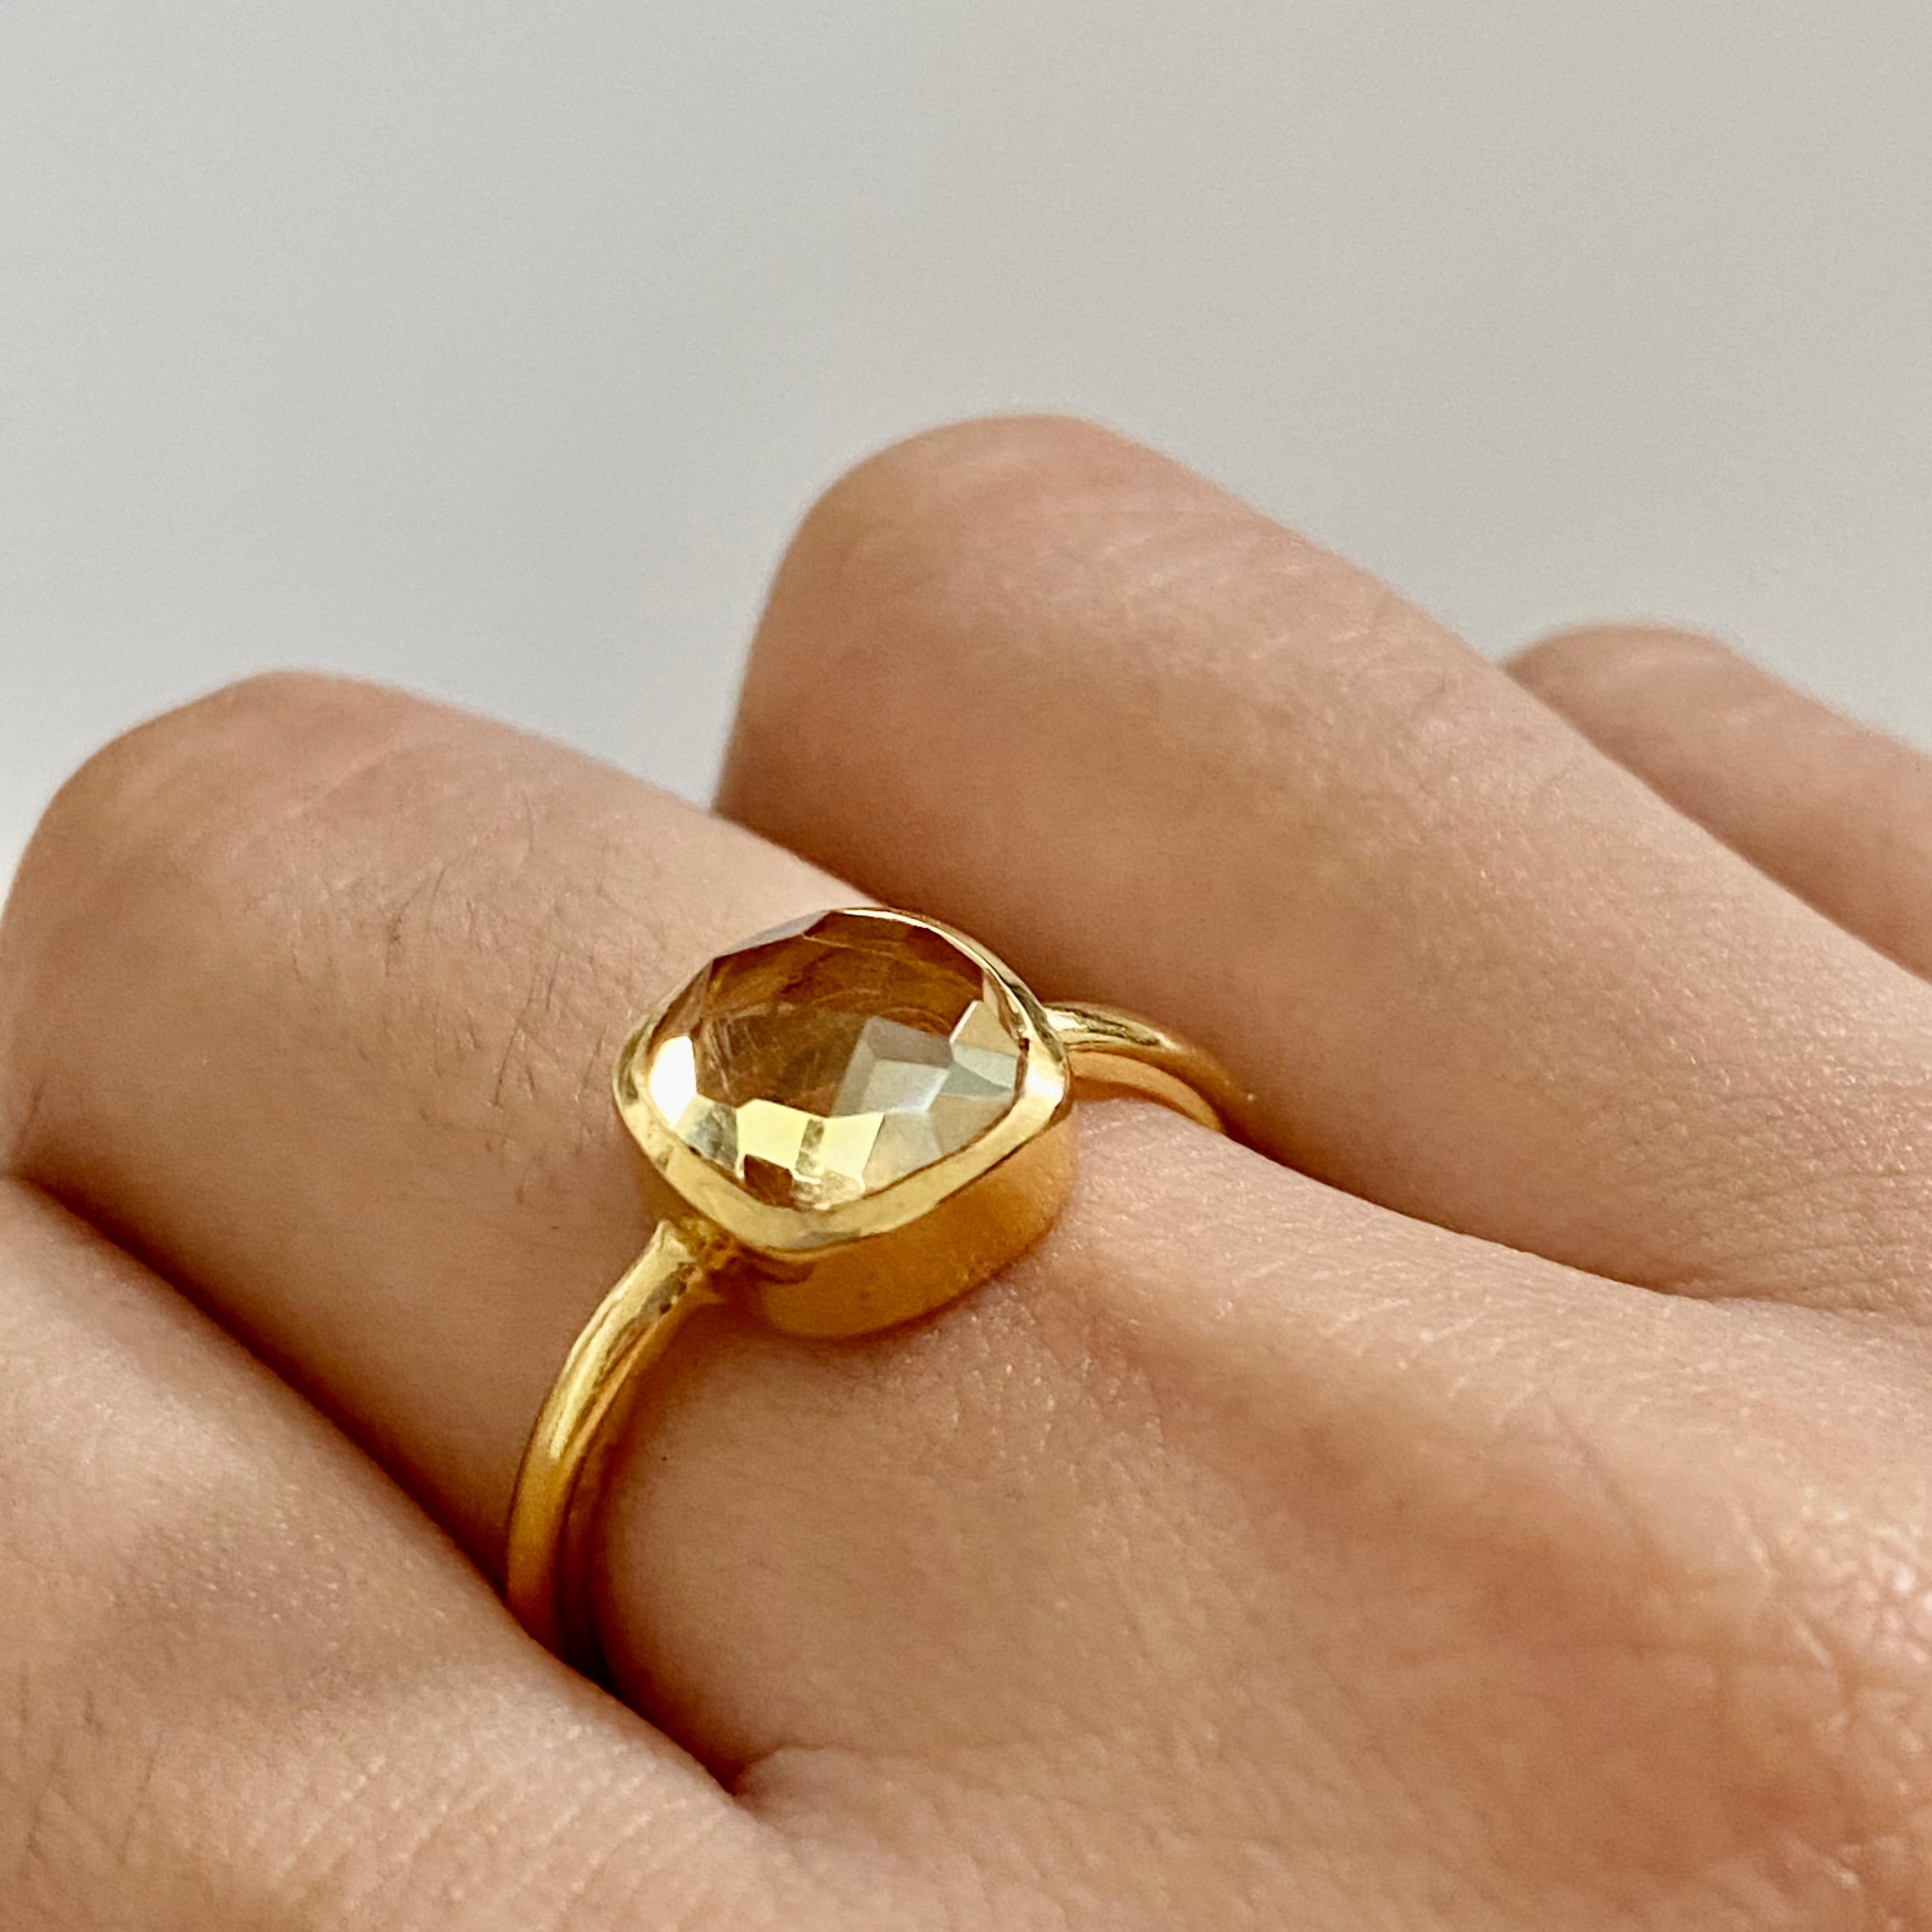 Faceted Square Cut Natural Gemstone Gold Plated Sterling Silver Solitaire Ring - Citrine